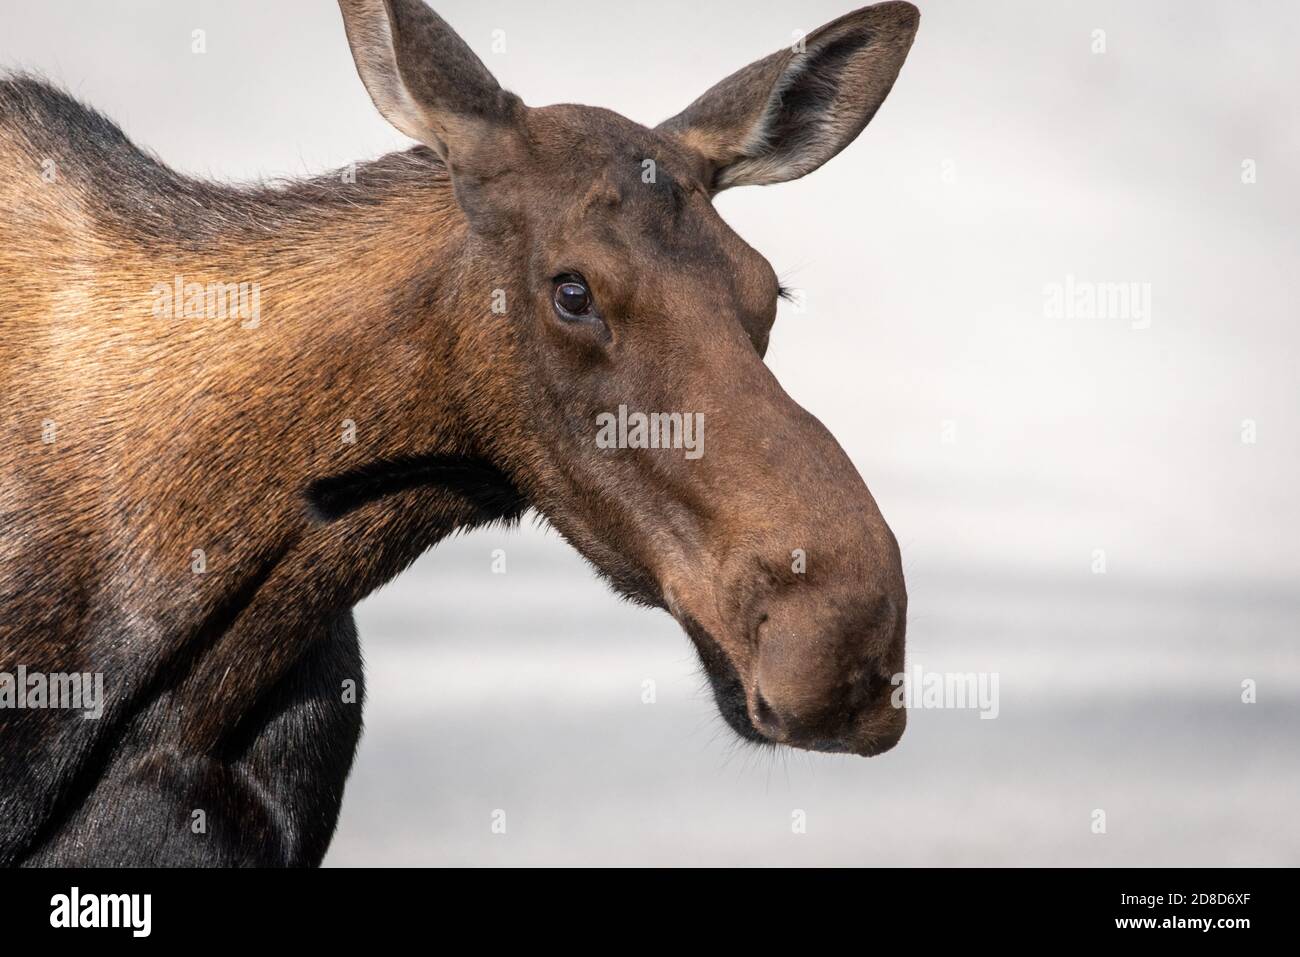 A moose wandered onto the road in Canada Stock Photo